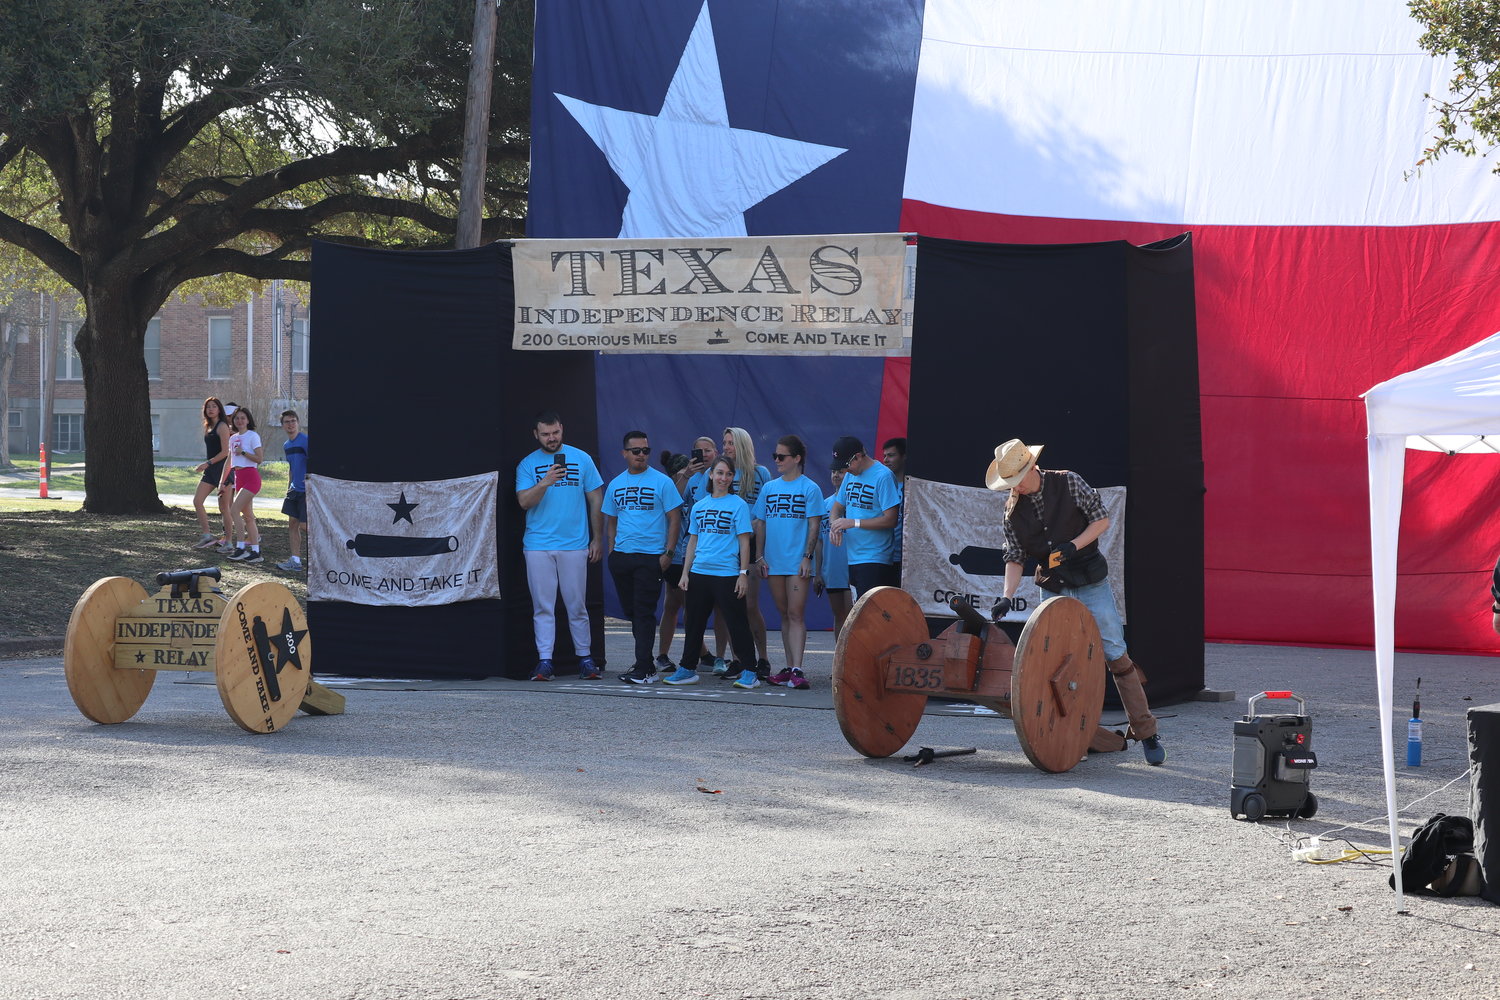 Runners wait to start the 2022 Texas Independence Relay